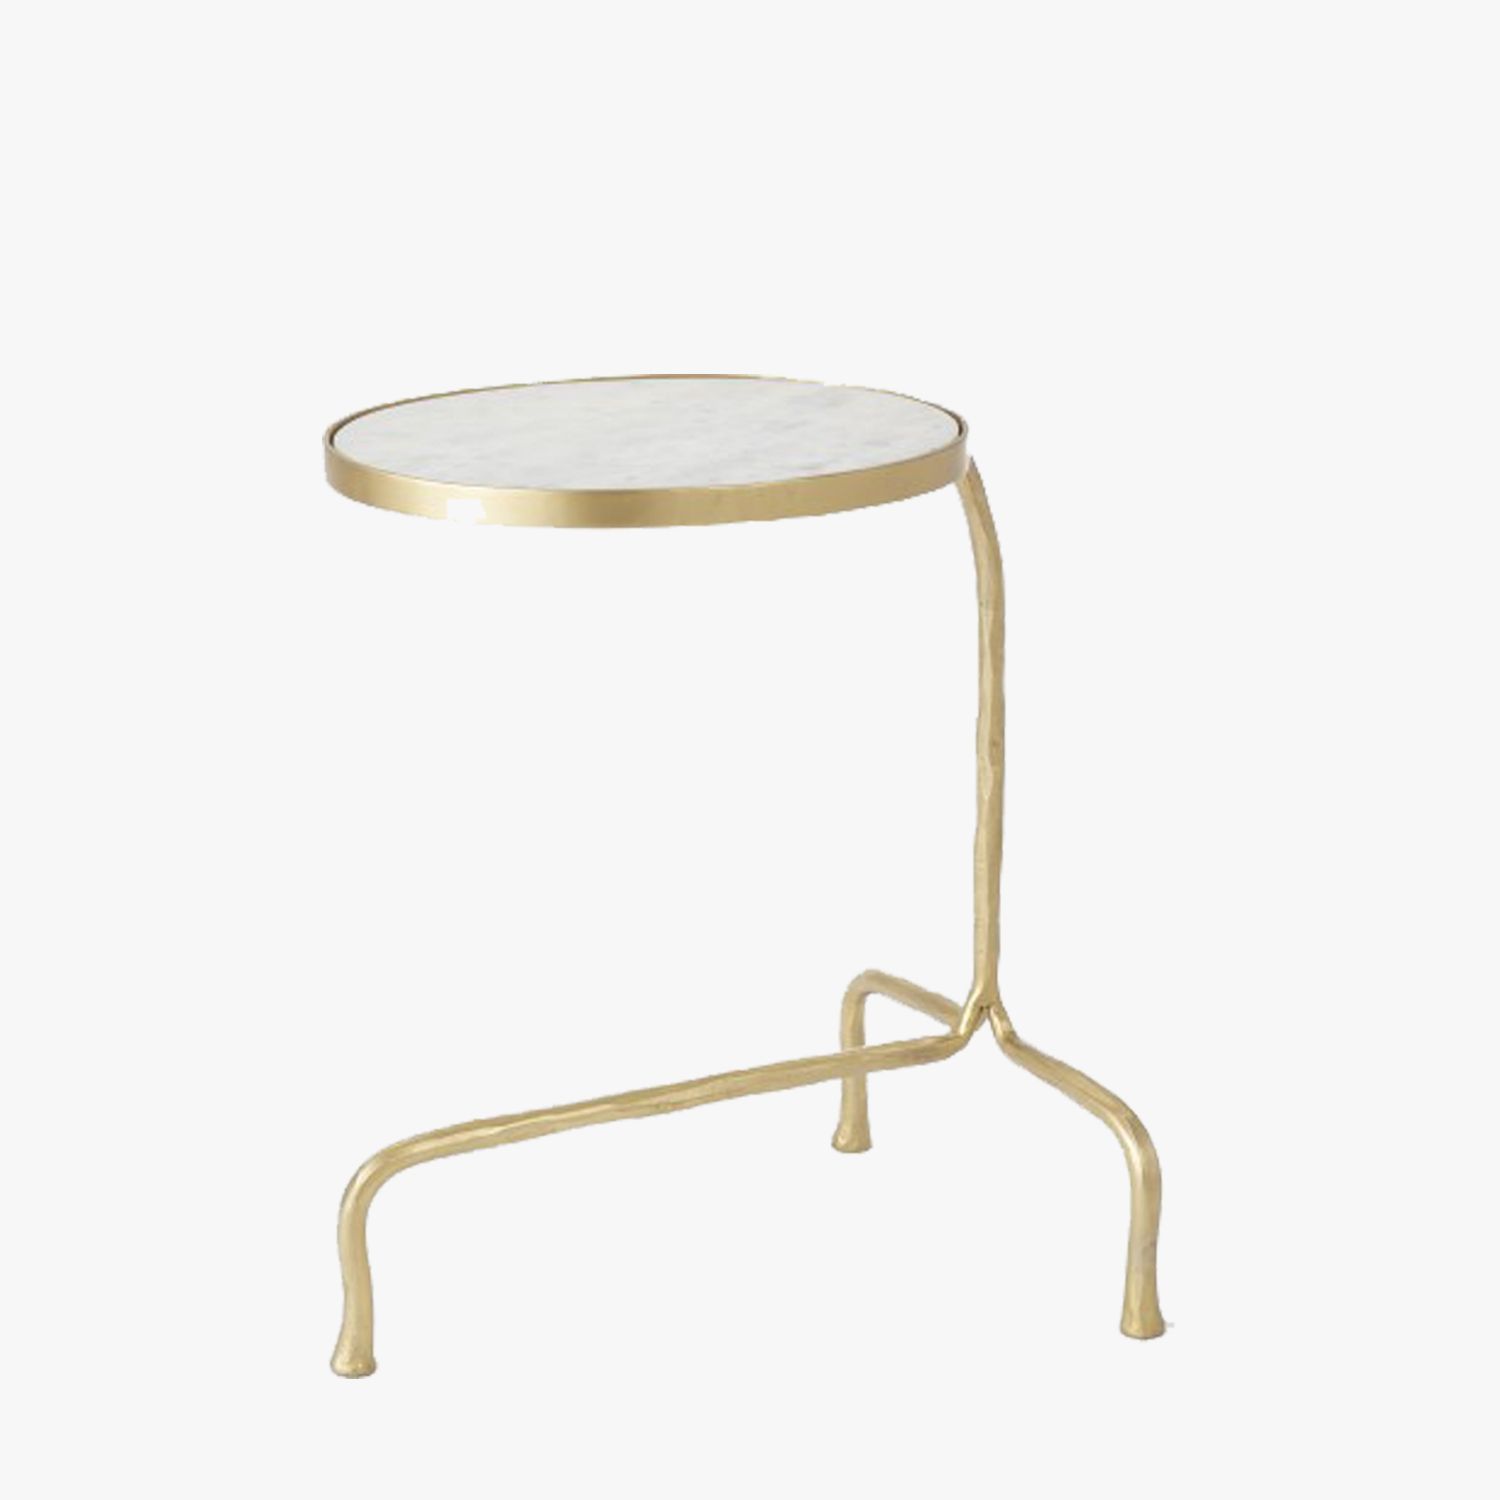 cantilever brass accent table marble top and marbles topaccent signy drum mosaic outdoor furniture dining chairs with arms inexpensive patio sets worldwide west elm bistro long